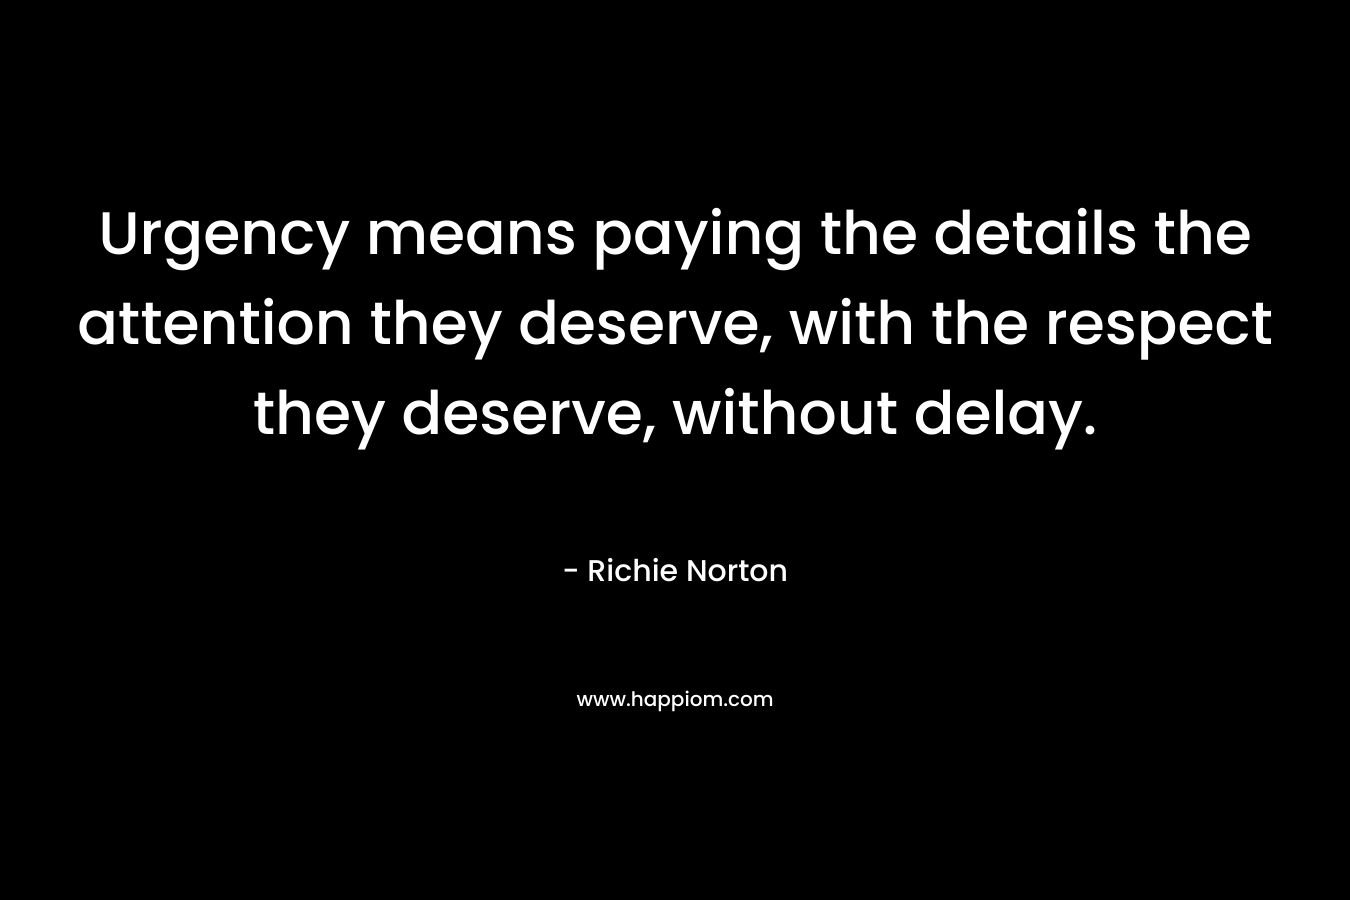 Urgency means paying the details the attention they deserve, with the respect they deserve, without delay.